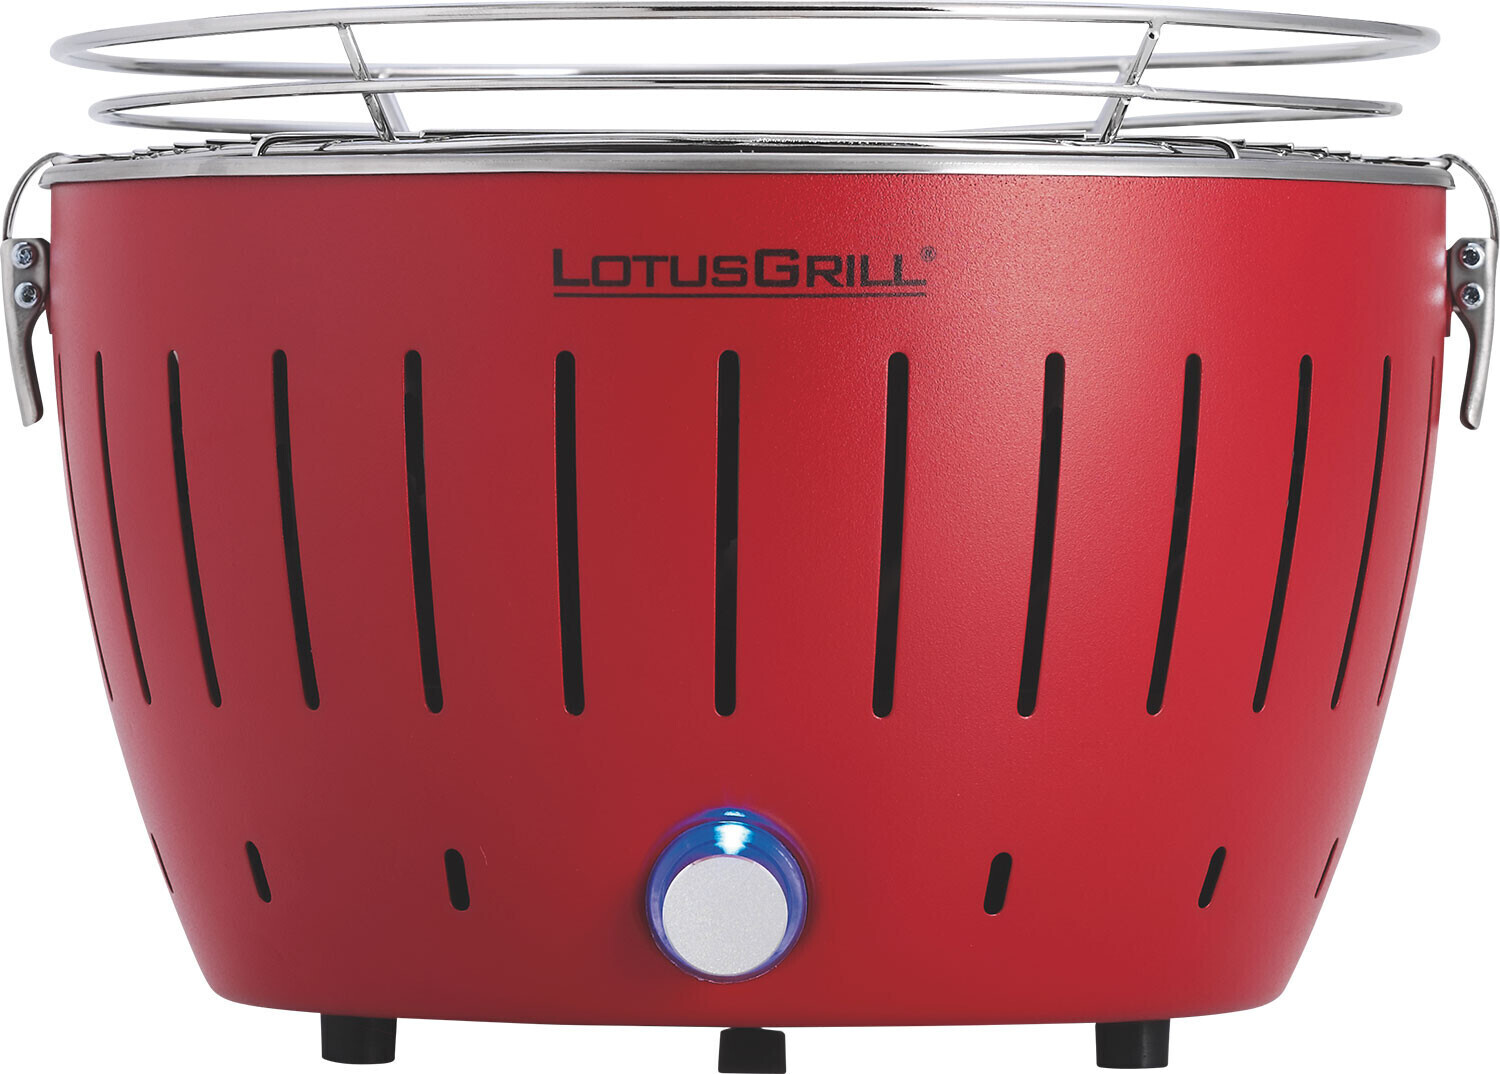 Lotus-Grill Grill hood for the compact LotusGrill Small (G280